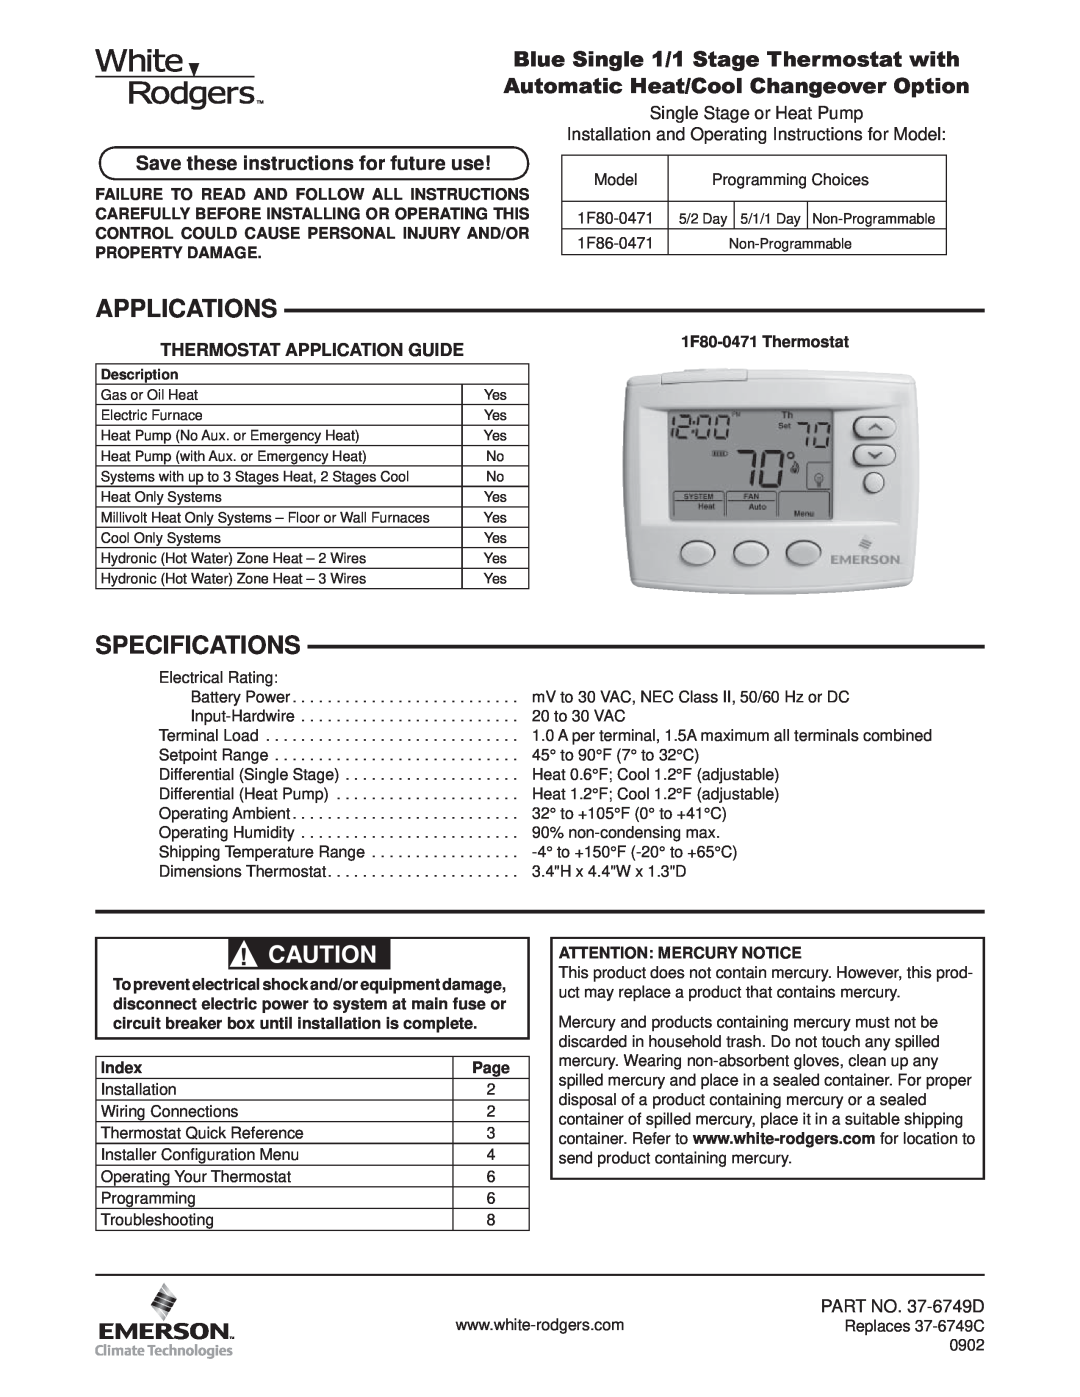 Technics 1F80-0471 specifications Applications, Specifications, Save these instructions for future use, PART NO. 37-6749D 